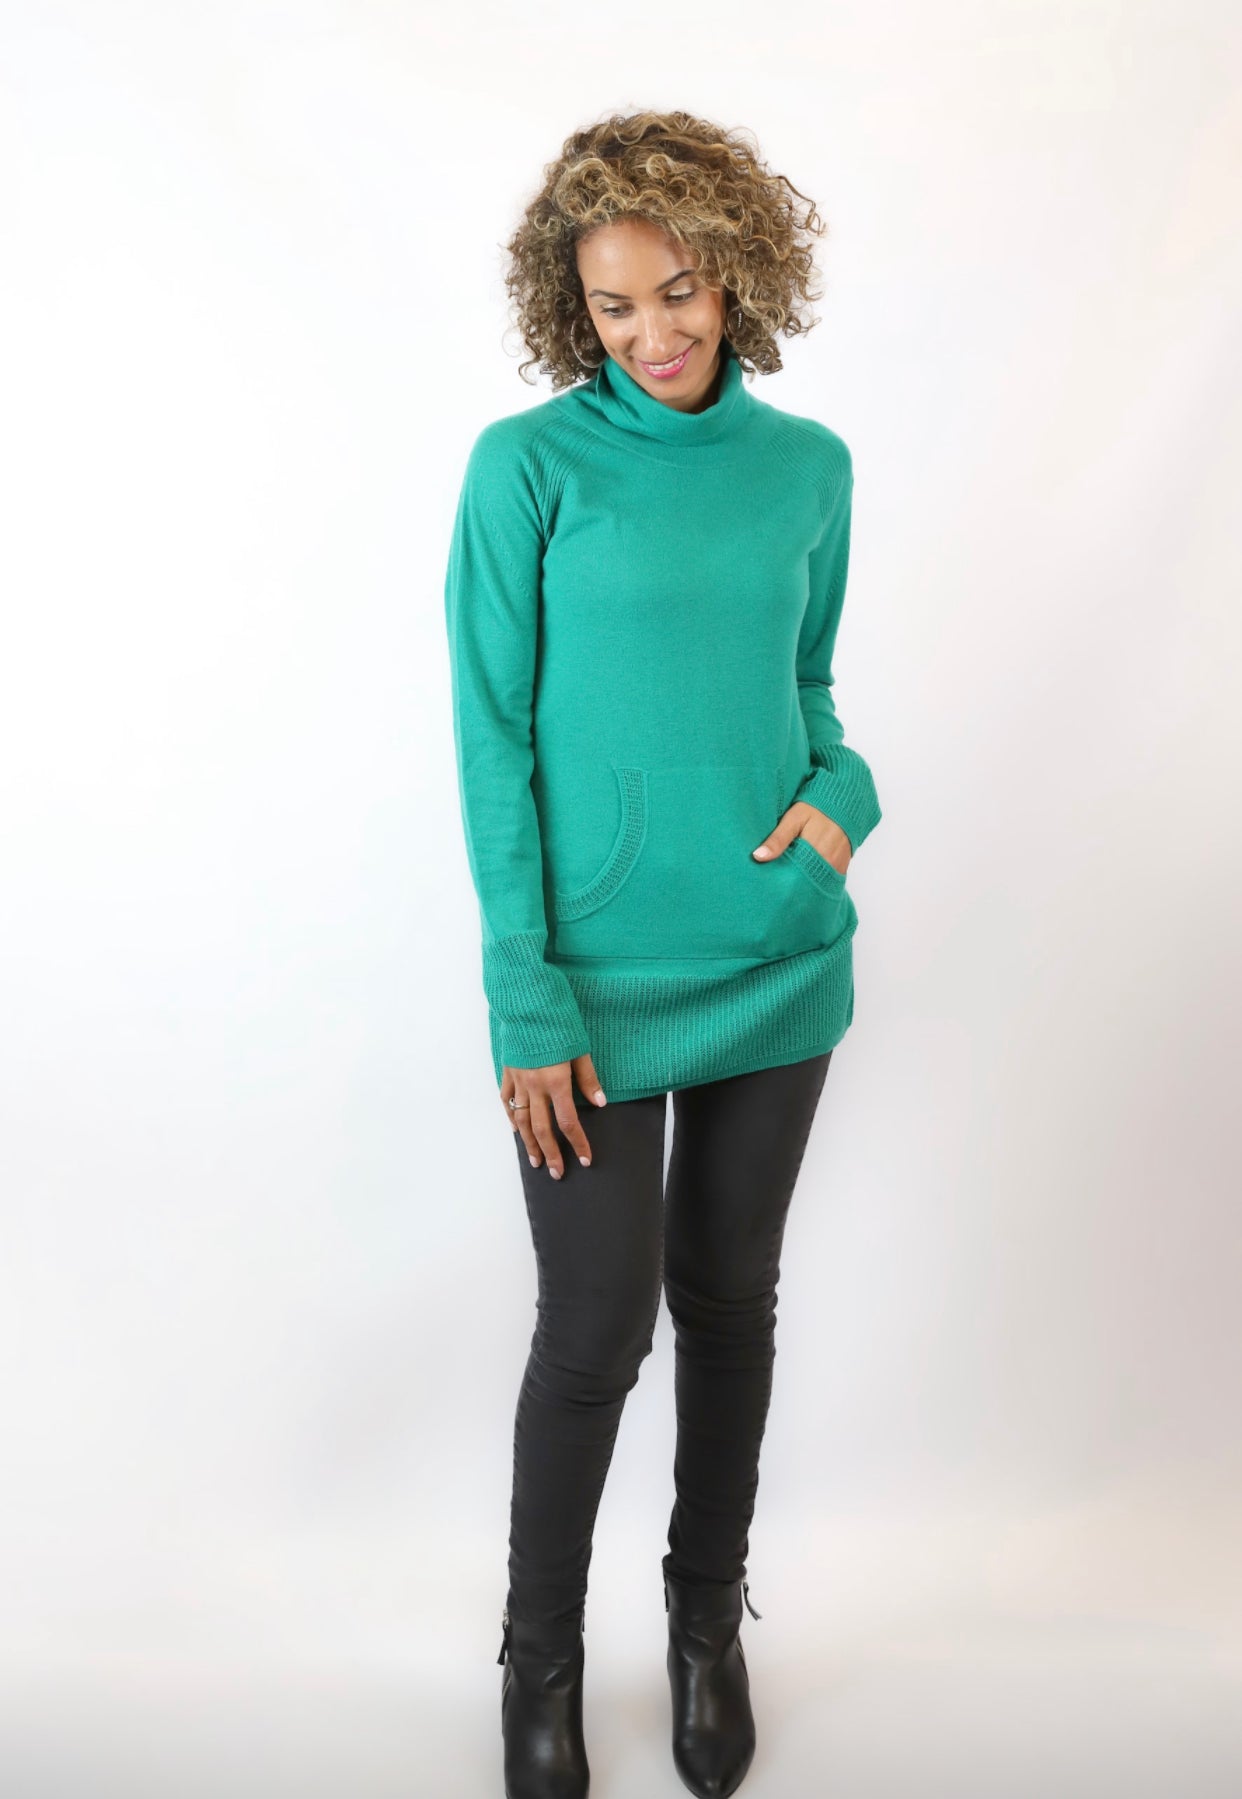 Roll neck with pockets and trim at the bottom